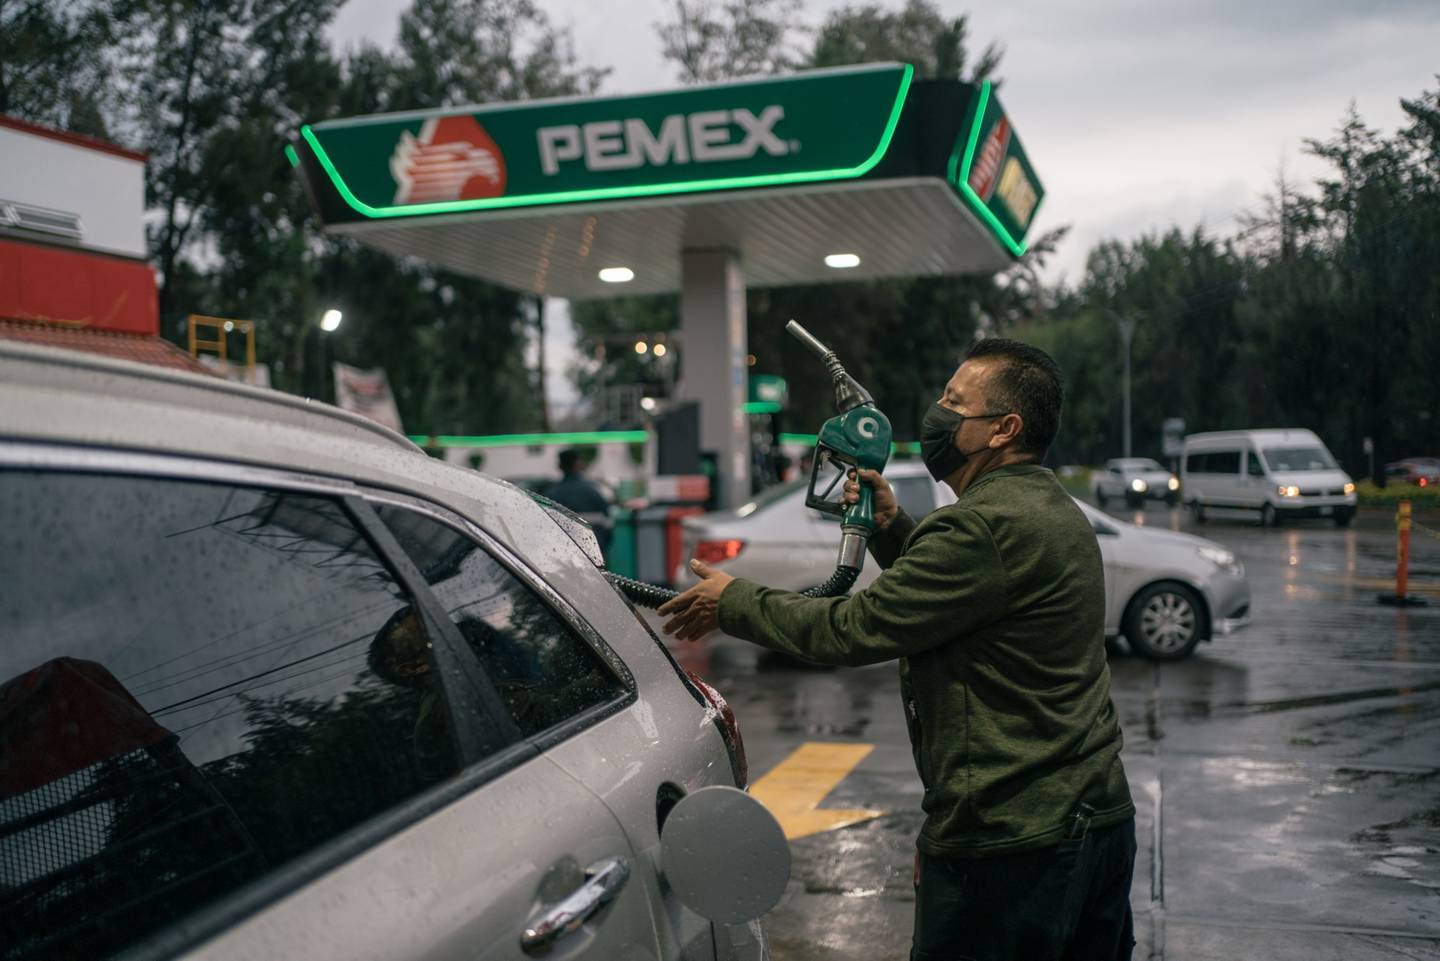 President López Obrador's government budgeted nearly $22 billion for gasoline subsidies in 2022.dfd